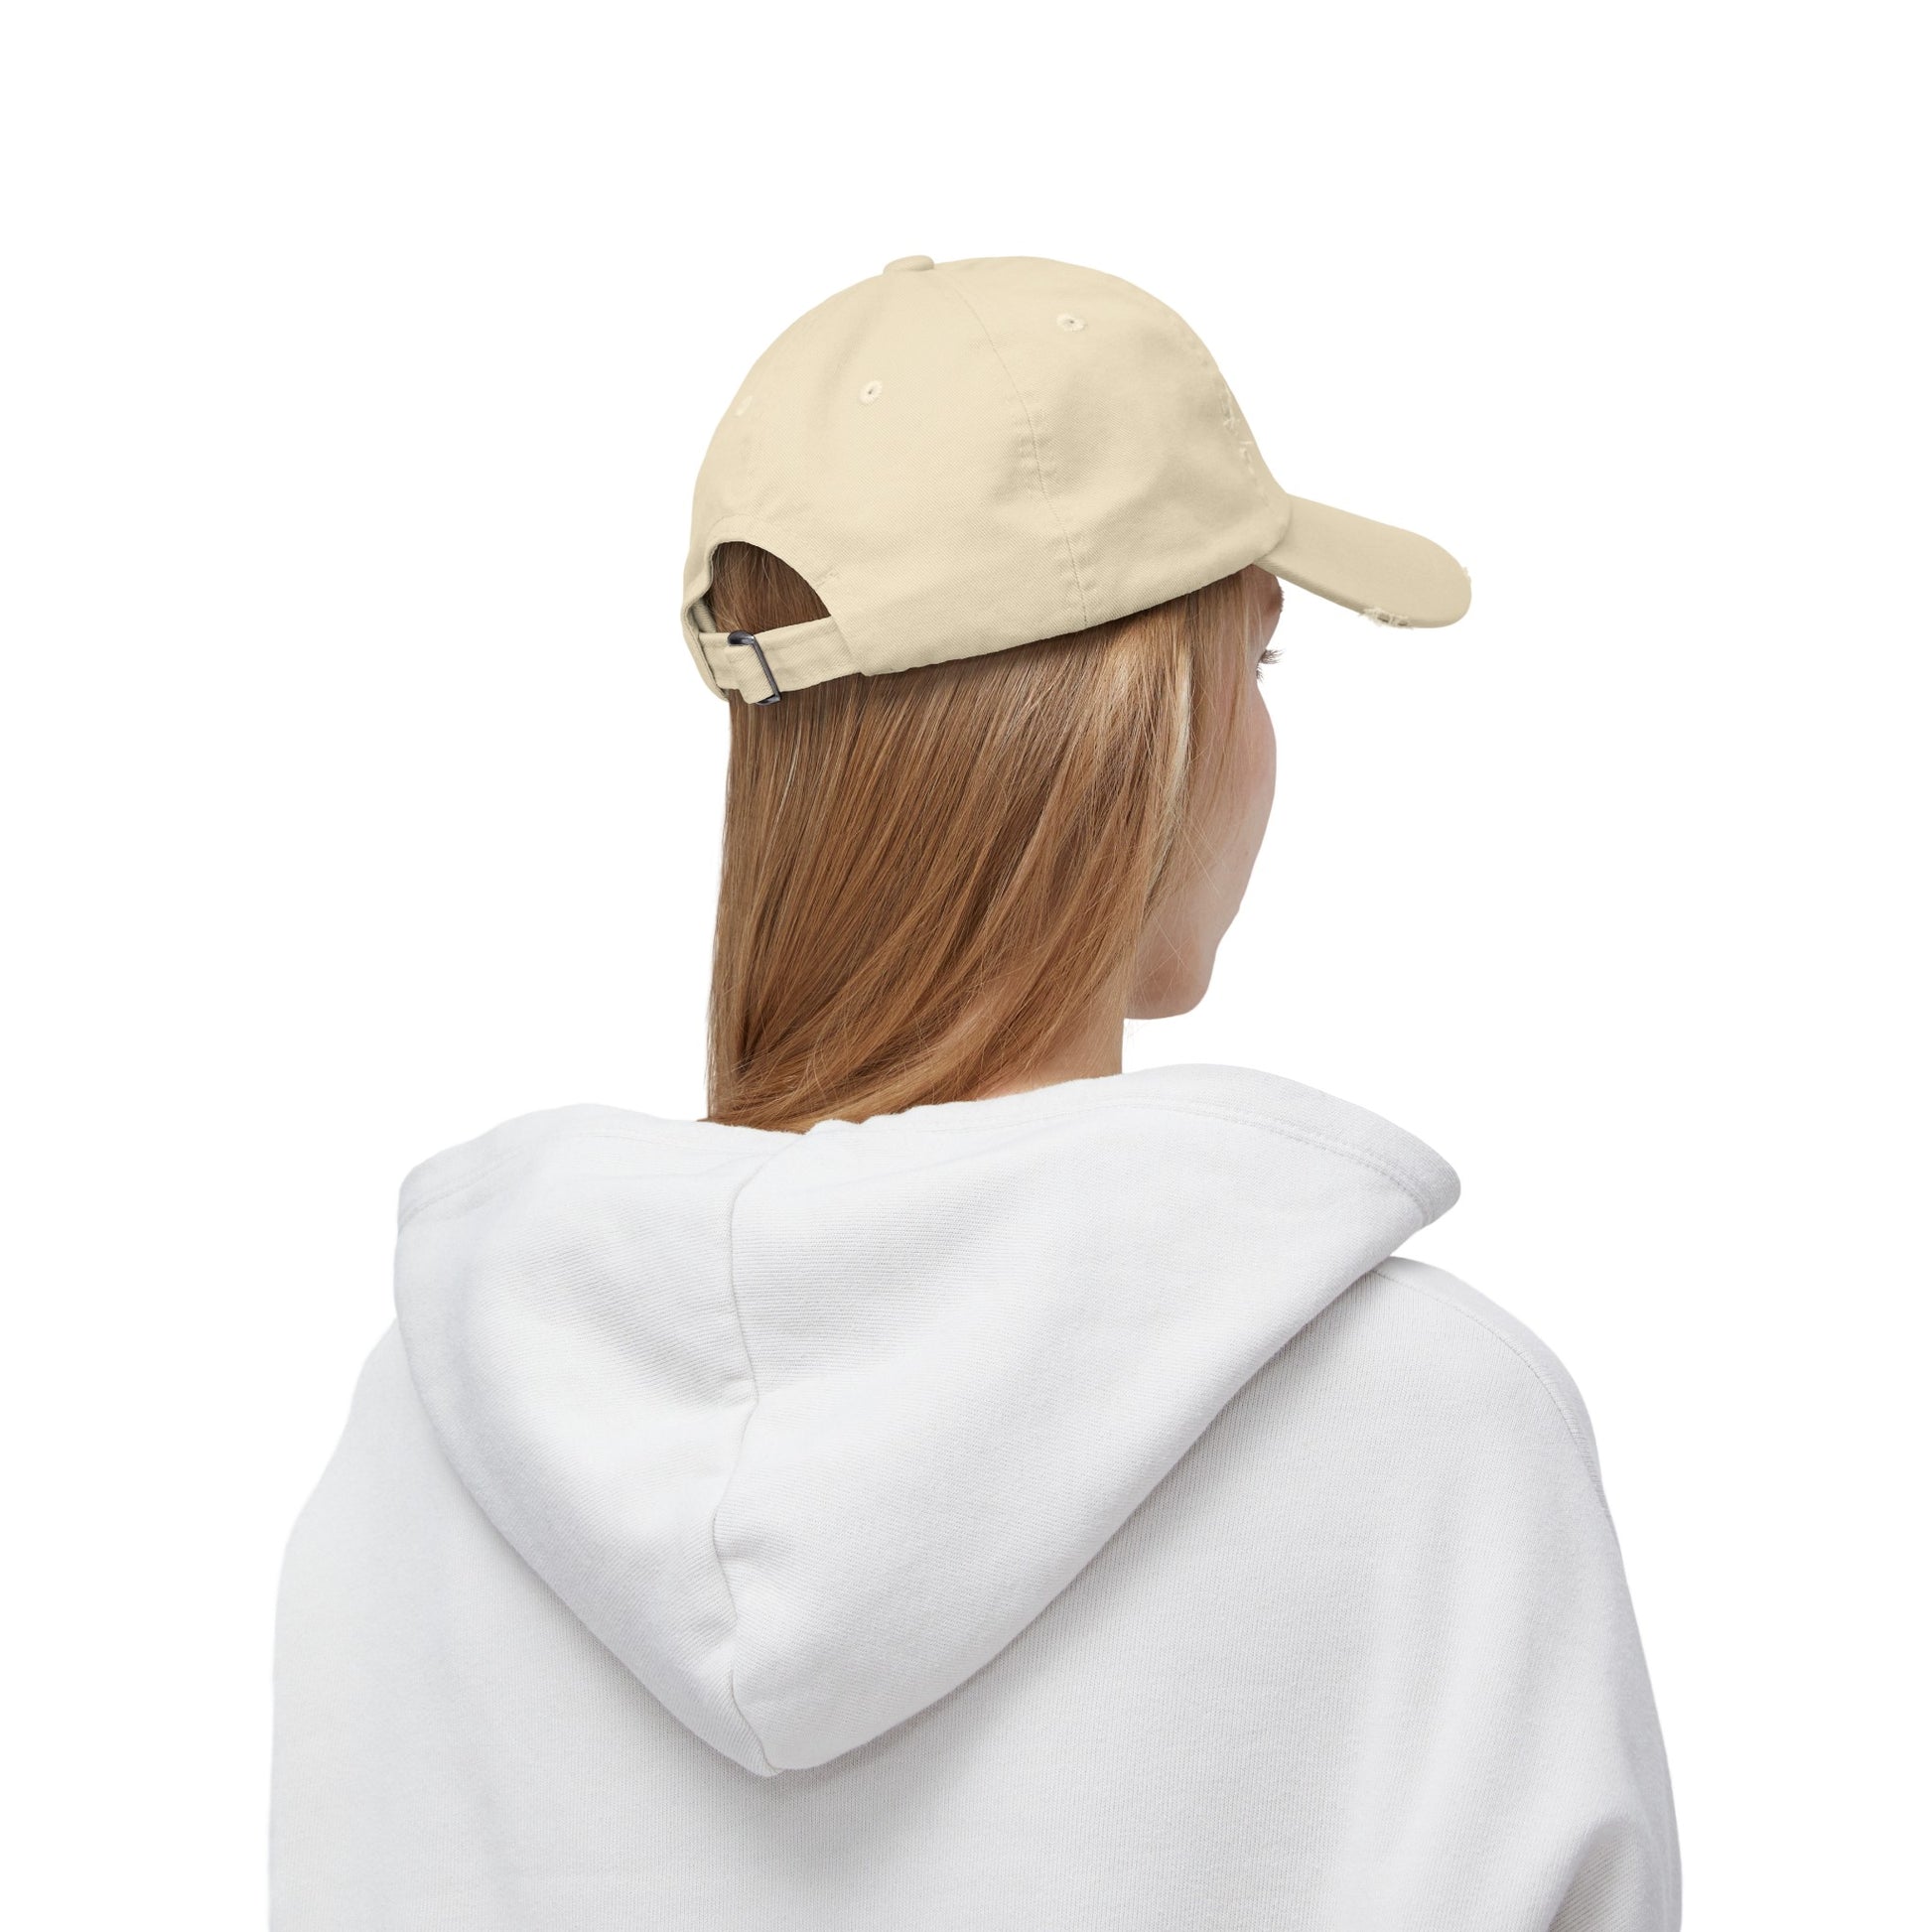 a woman wearing a white hoodie and a baseball cap